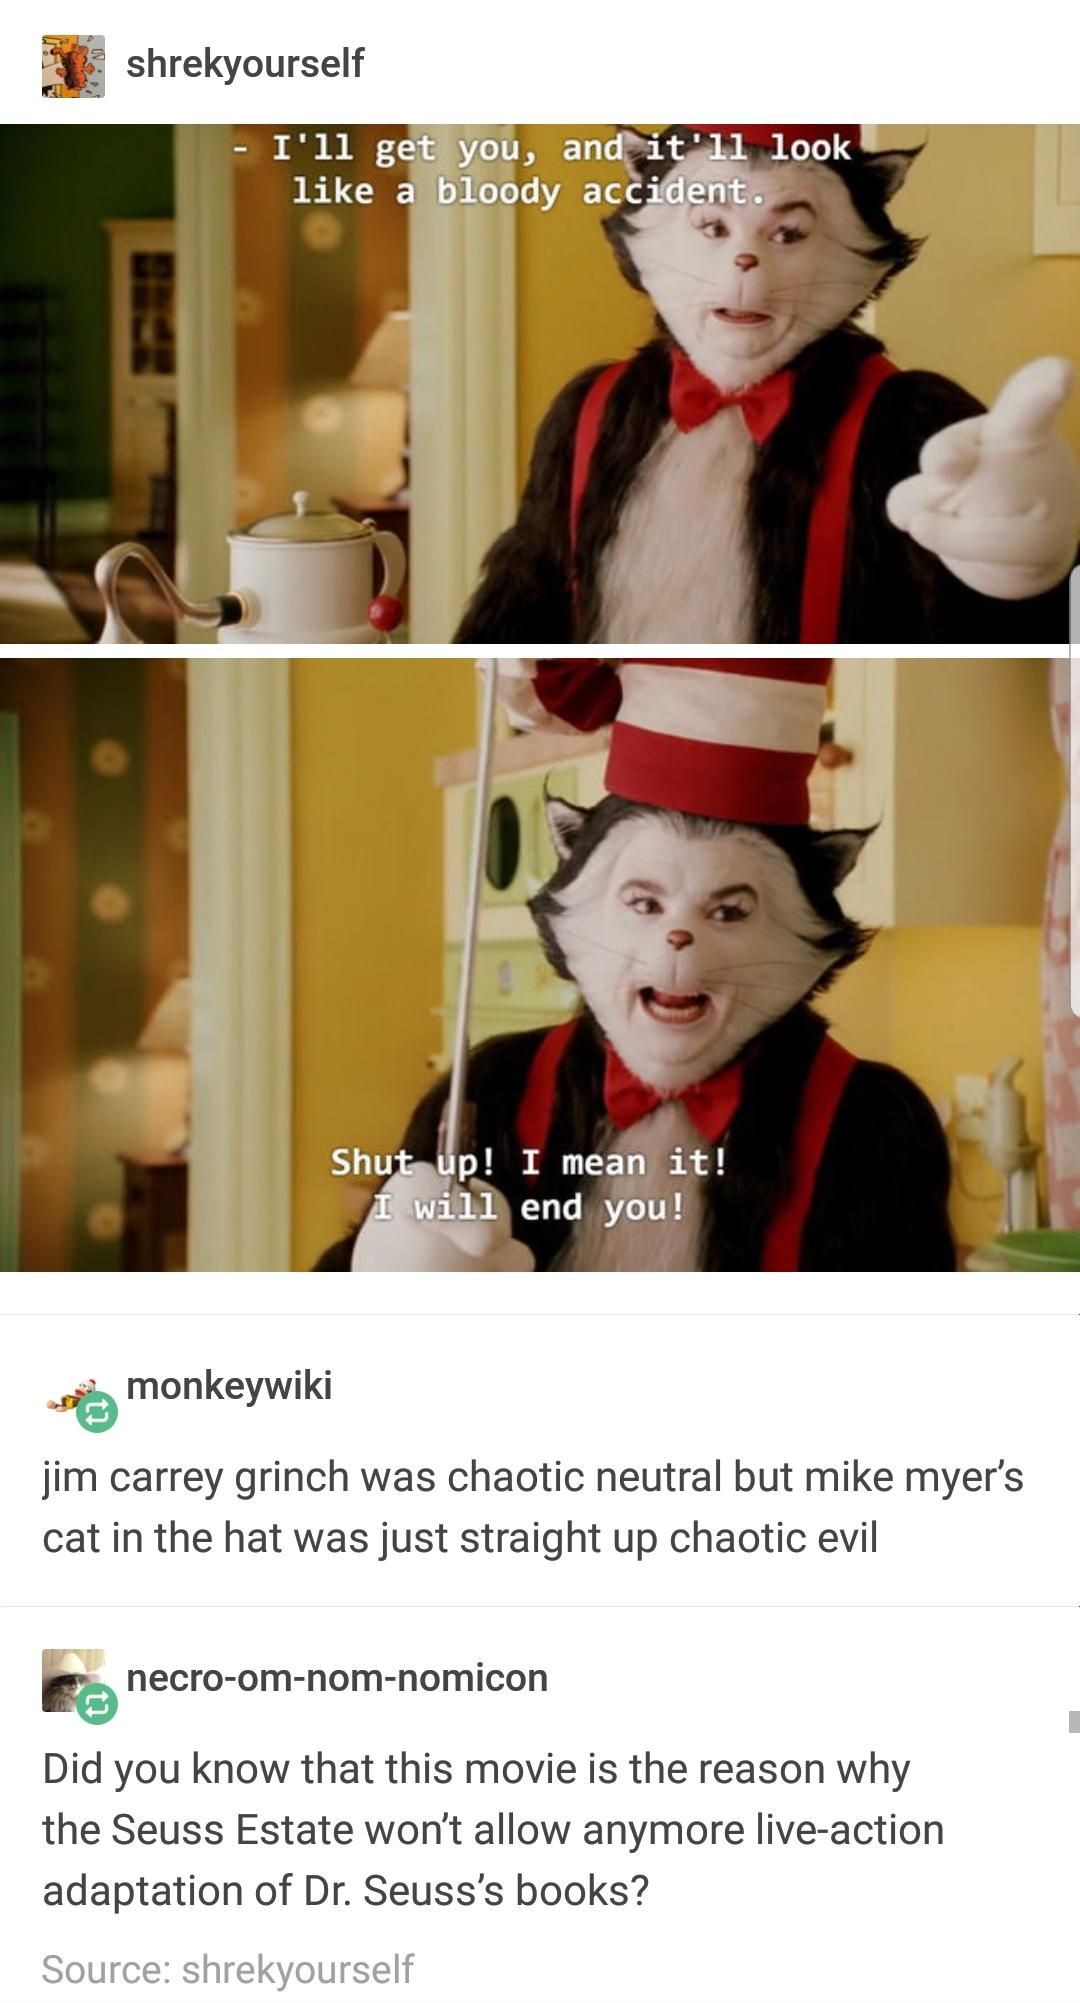 Chaotic evil cat in the hat